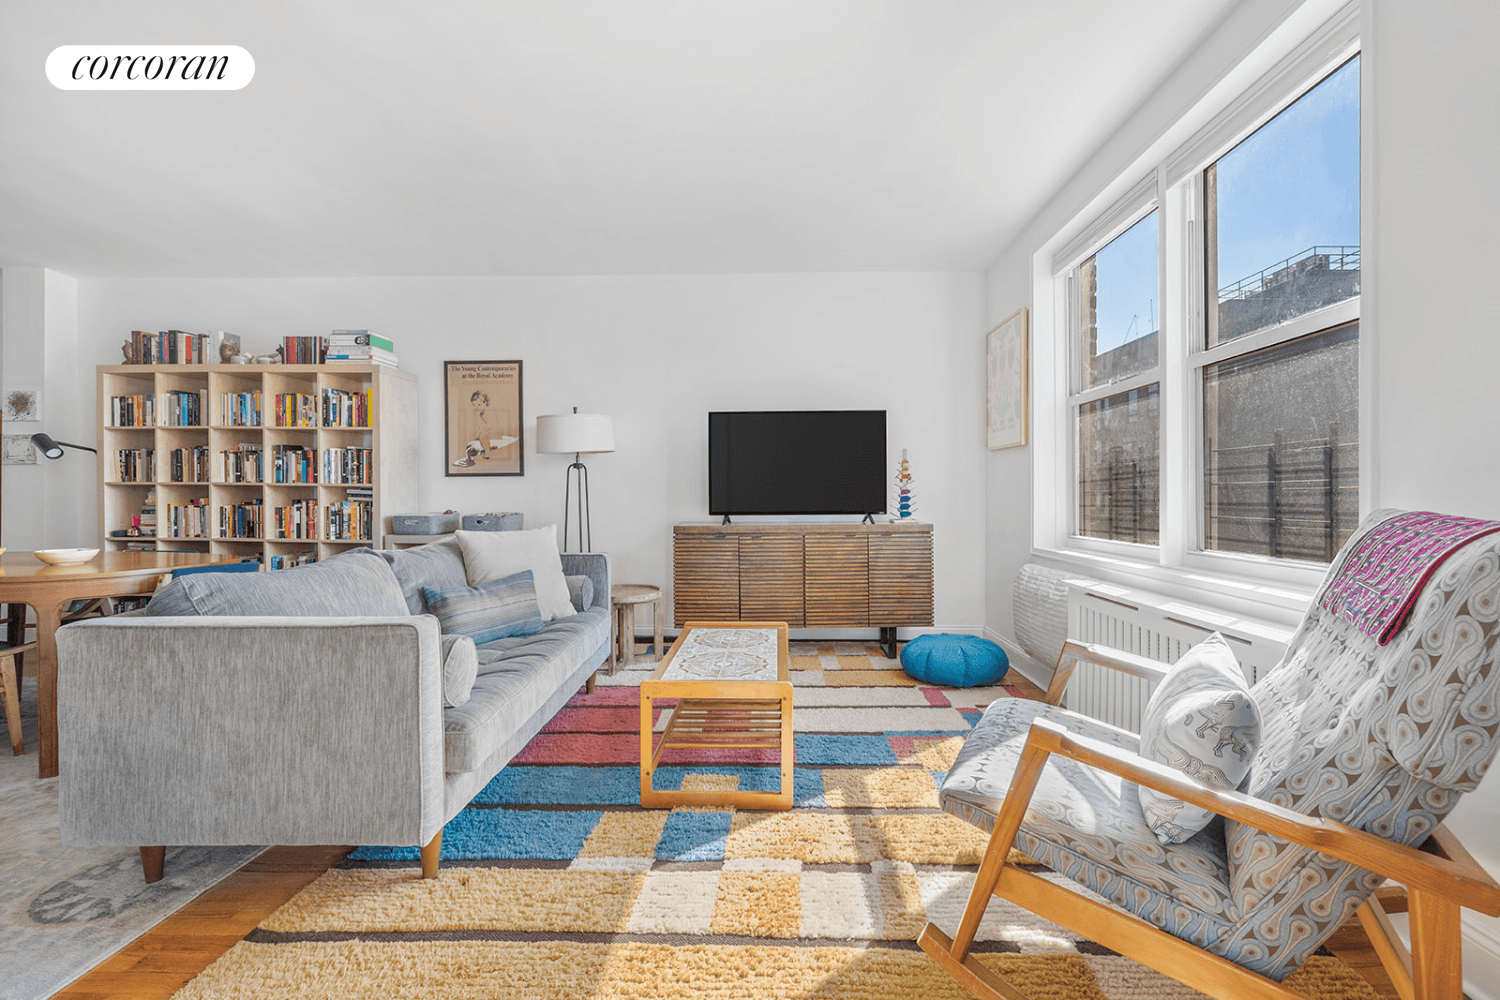 SUNSHINE SUNSHINE ! Welcome to this crisp and clean 2 bedroom, 1 bath apartment in a full service coop building in prime Ditmas Park.